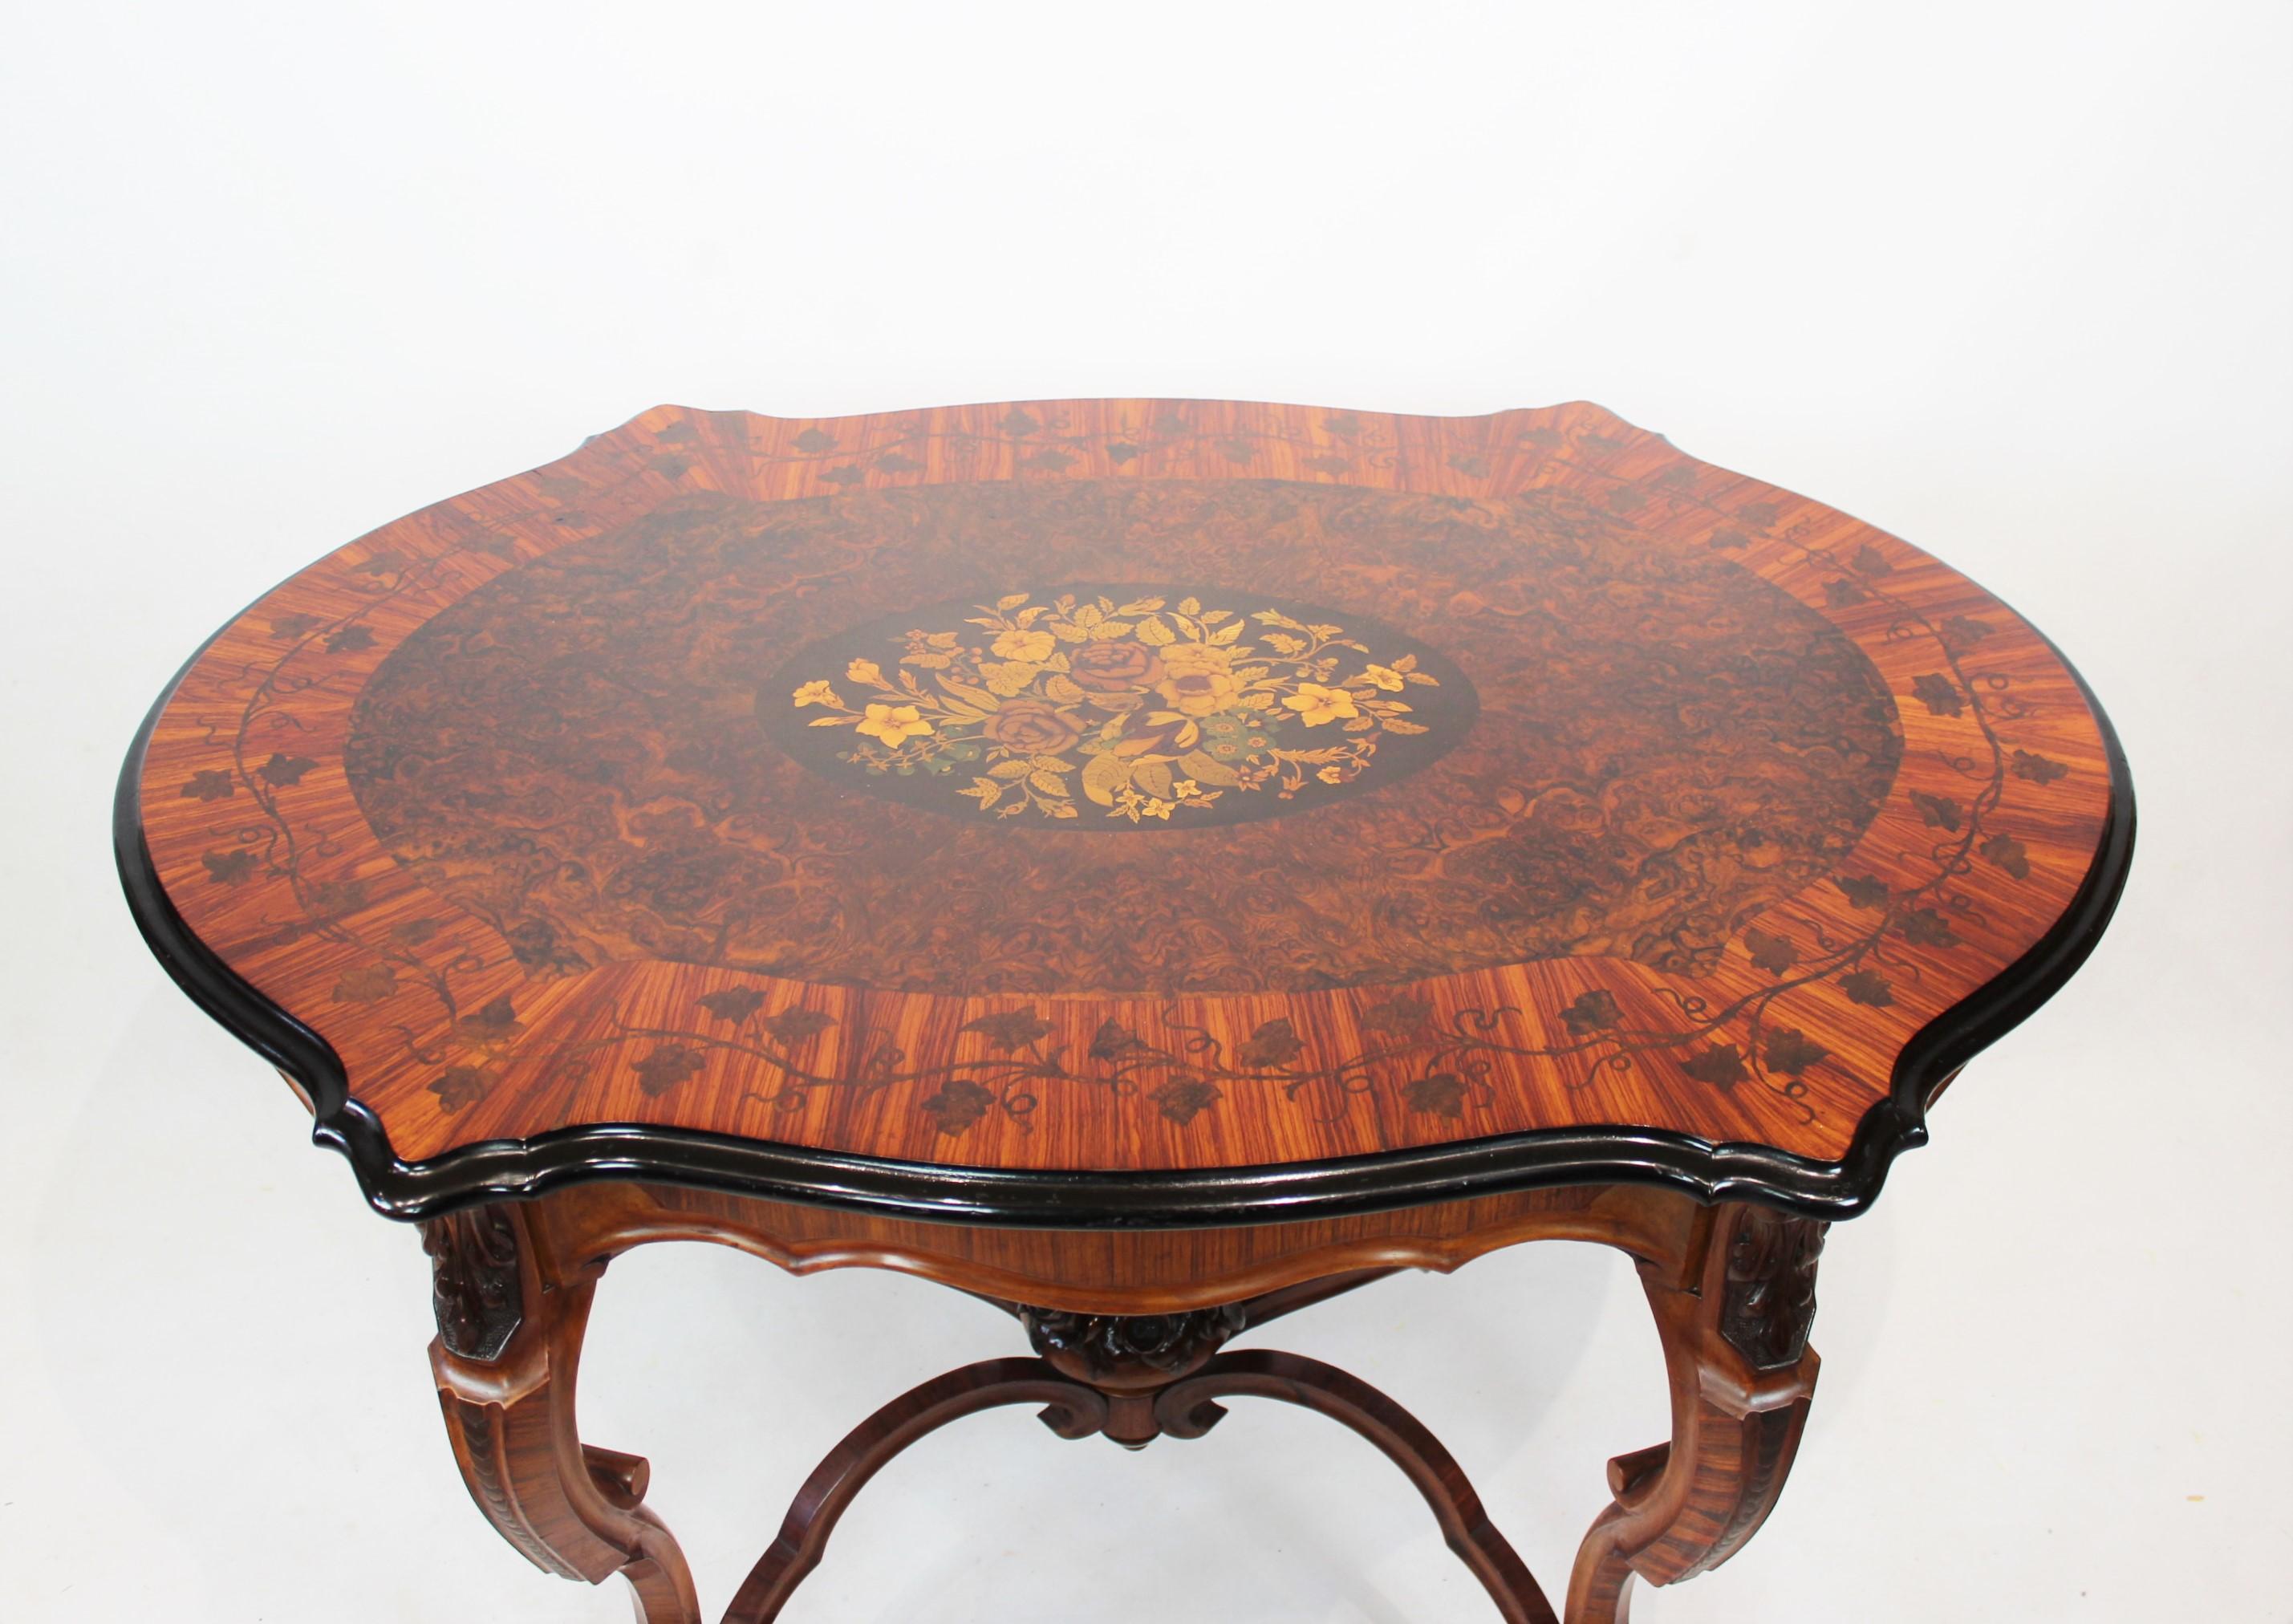 New Rococo pedestal table of walnut with carvings and inlaid intarsia of fruitwood from the 1880s. The table is in great antique condition.
  